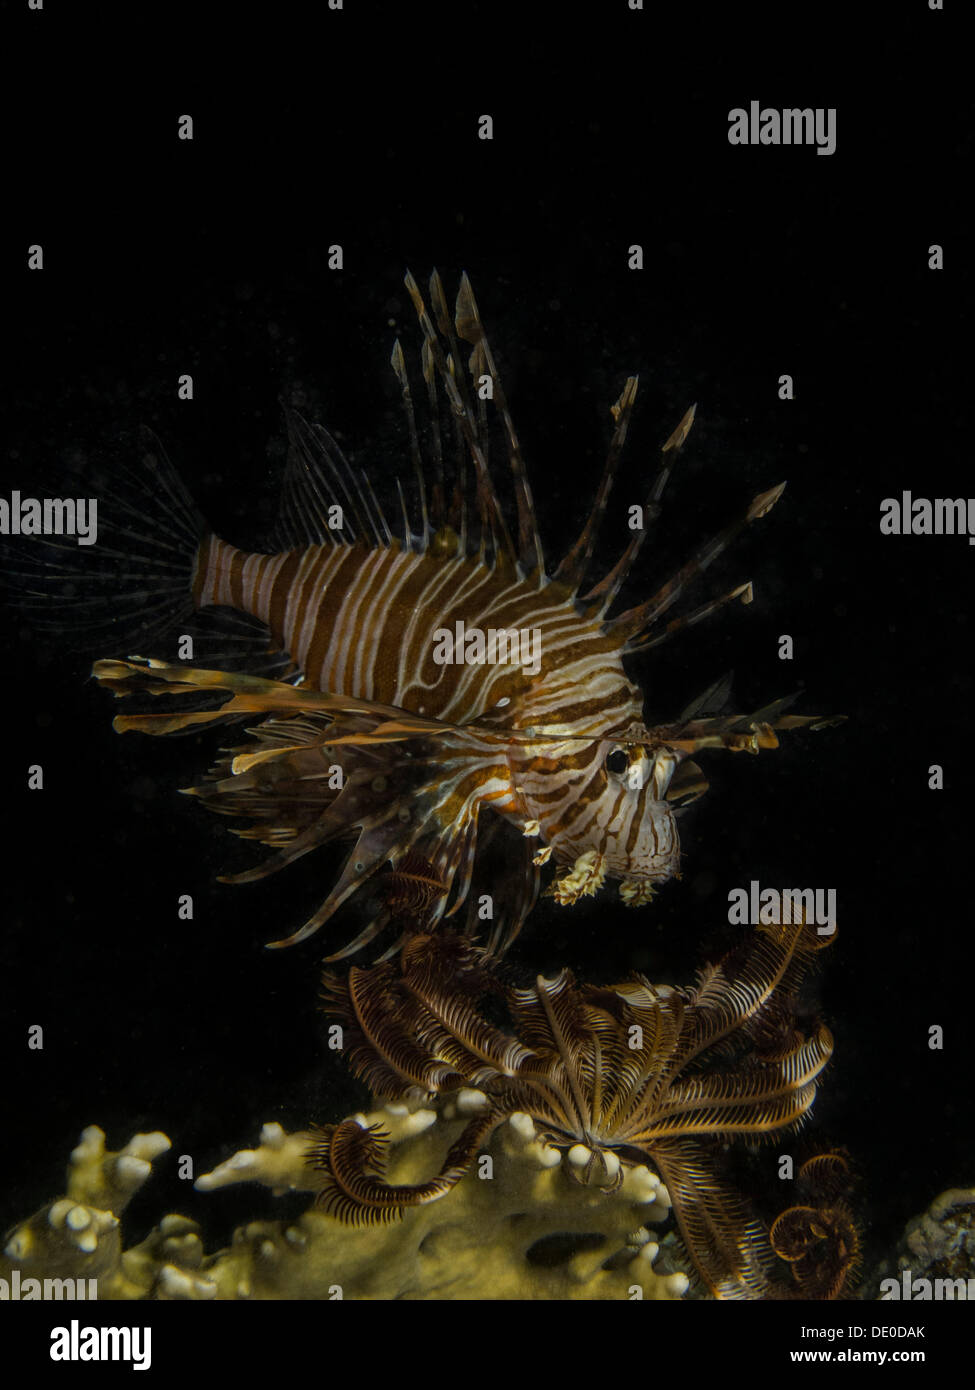 Common Lionfish or Devil Firefish (Pterois miles), Mangrove Bay, Red Sea, Egypt, Africa Stock Photo